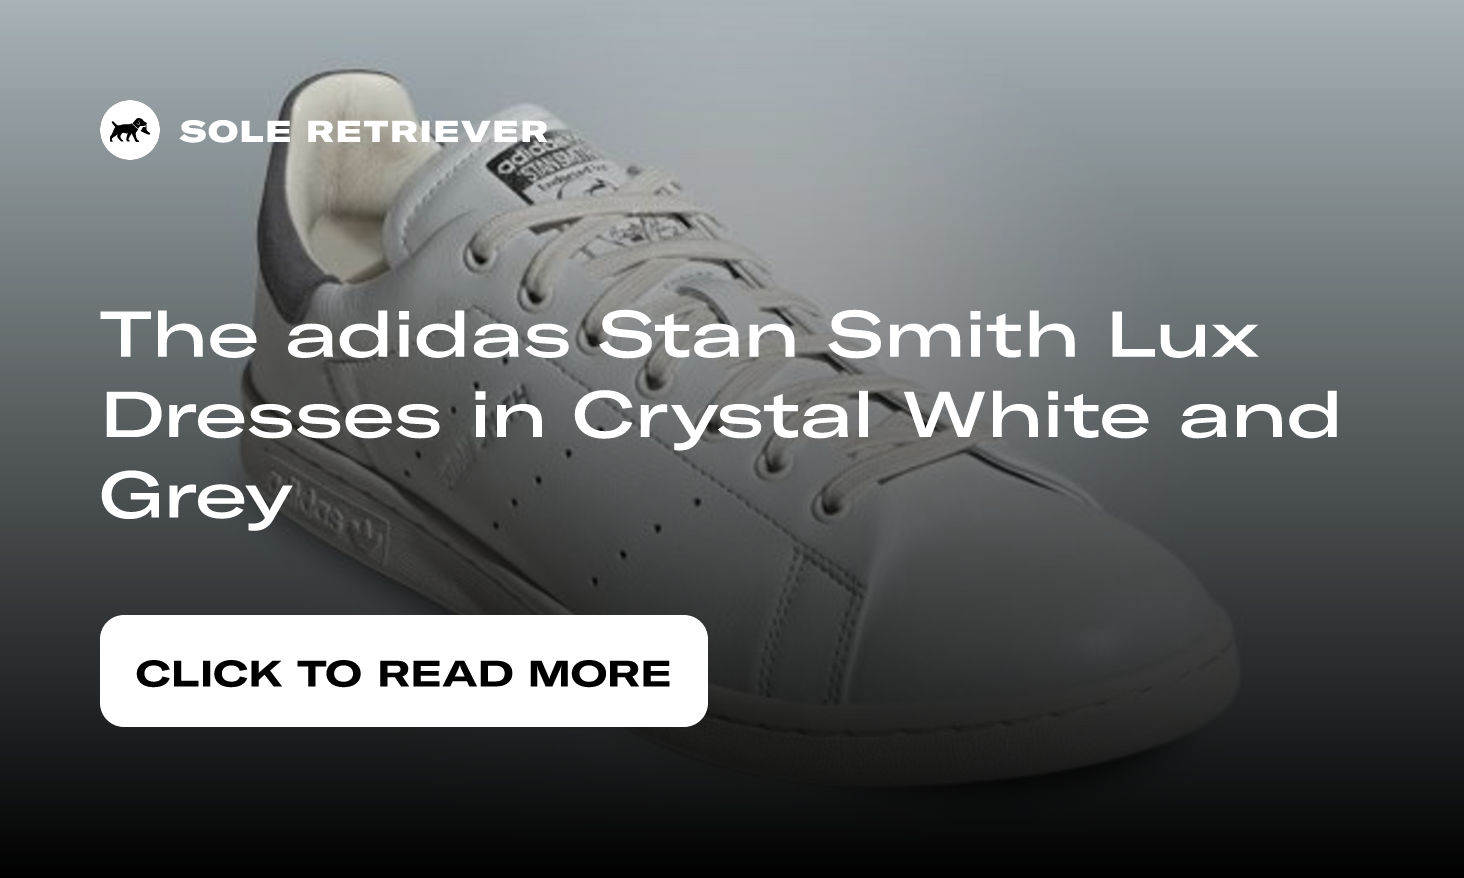 The adidas Stan Smith Lux Dresses in Crystal White and Grey